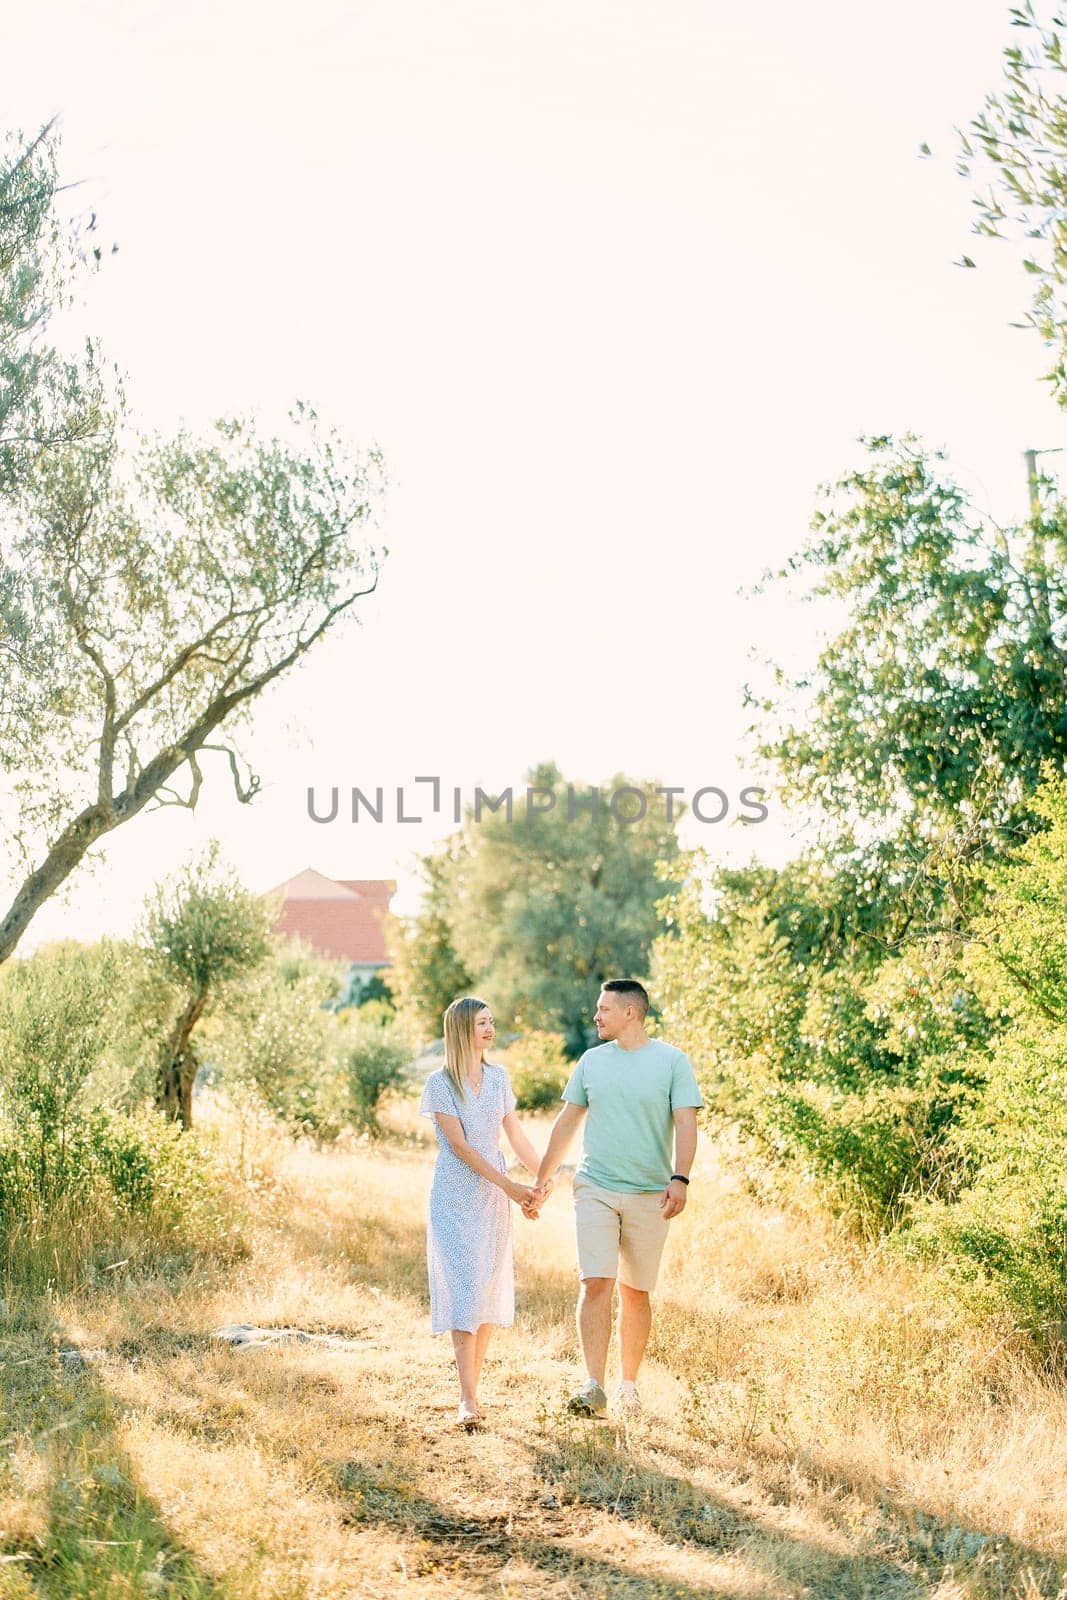 Man and woman walk on dry grass in a sunny garden holding hands by Nadtochiy